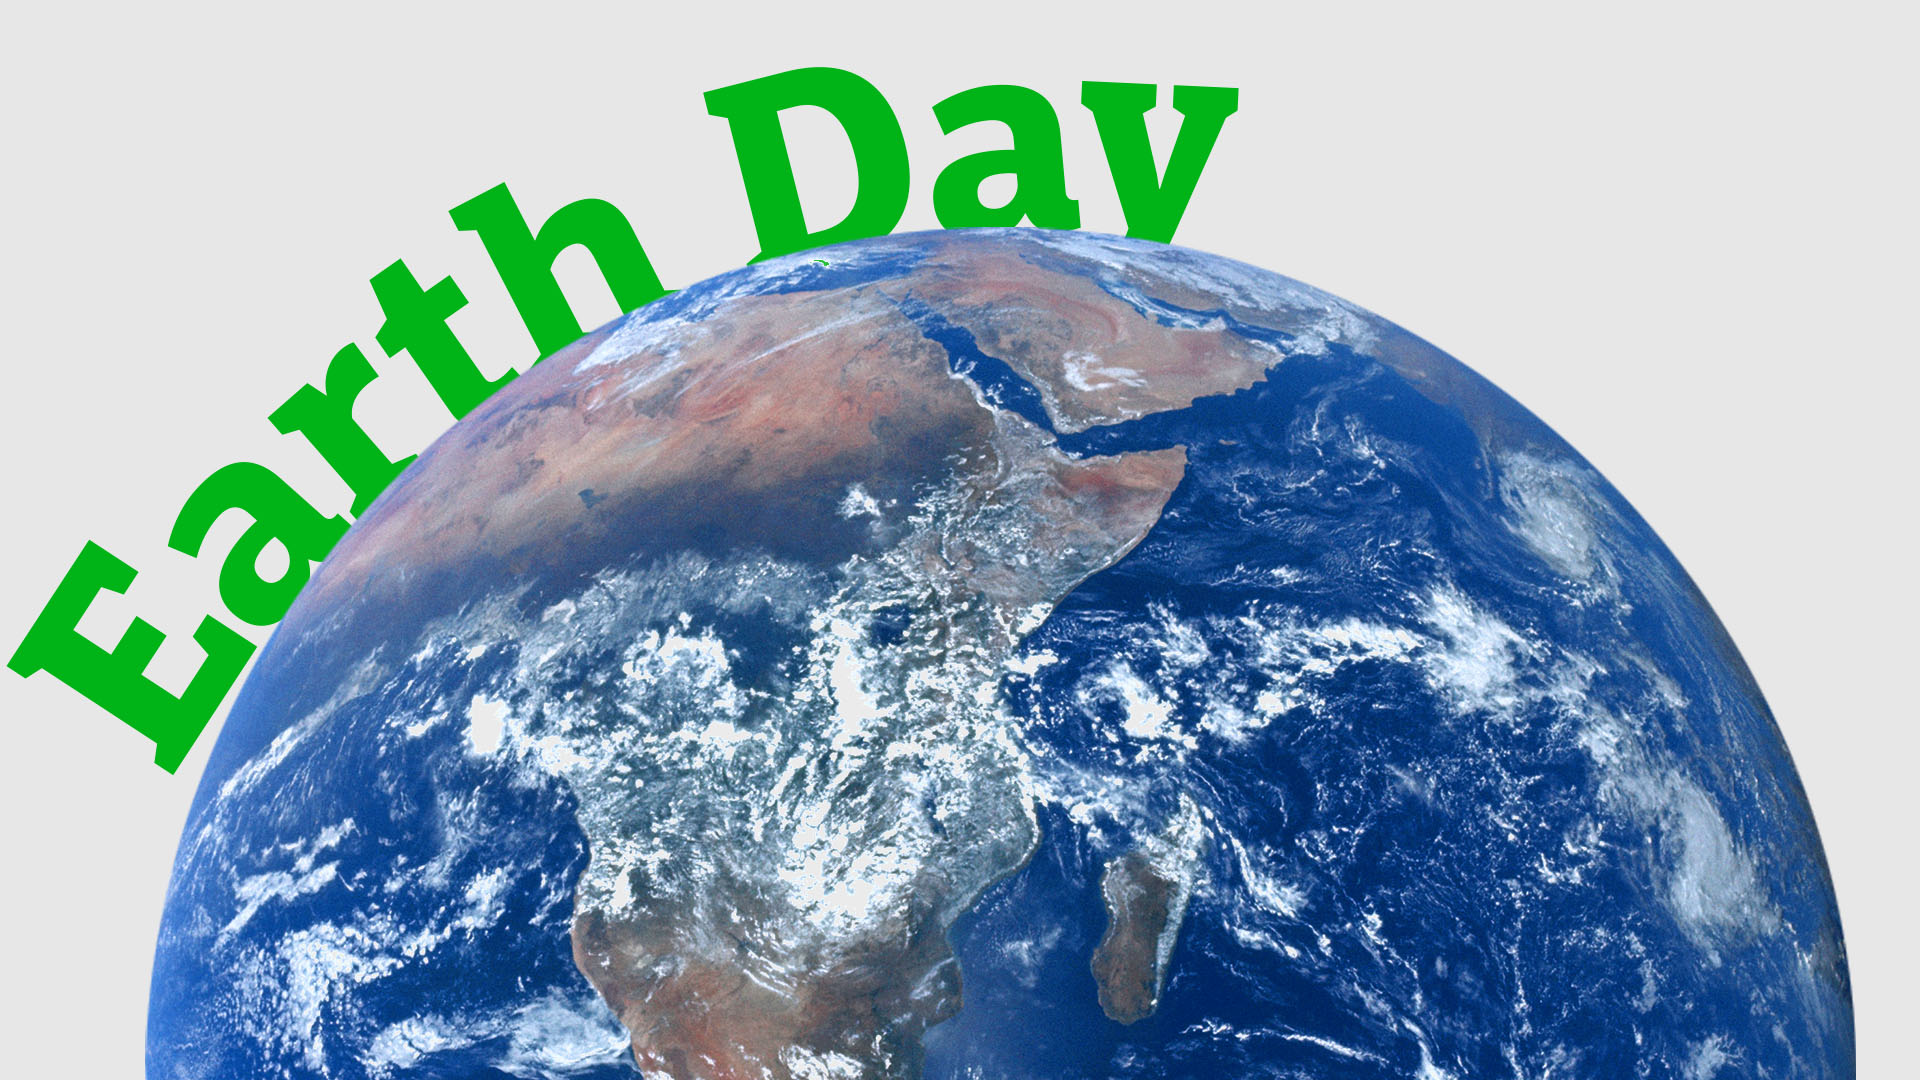 Down To Earth: When Did Earth Day Become A Yearly Holiday?